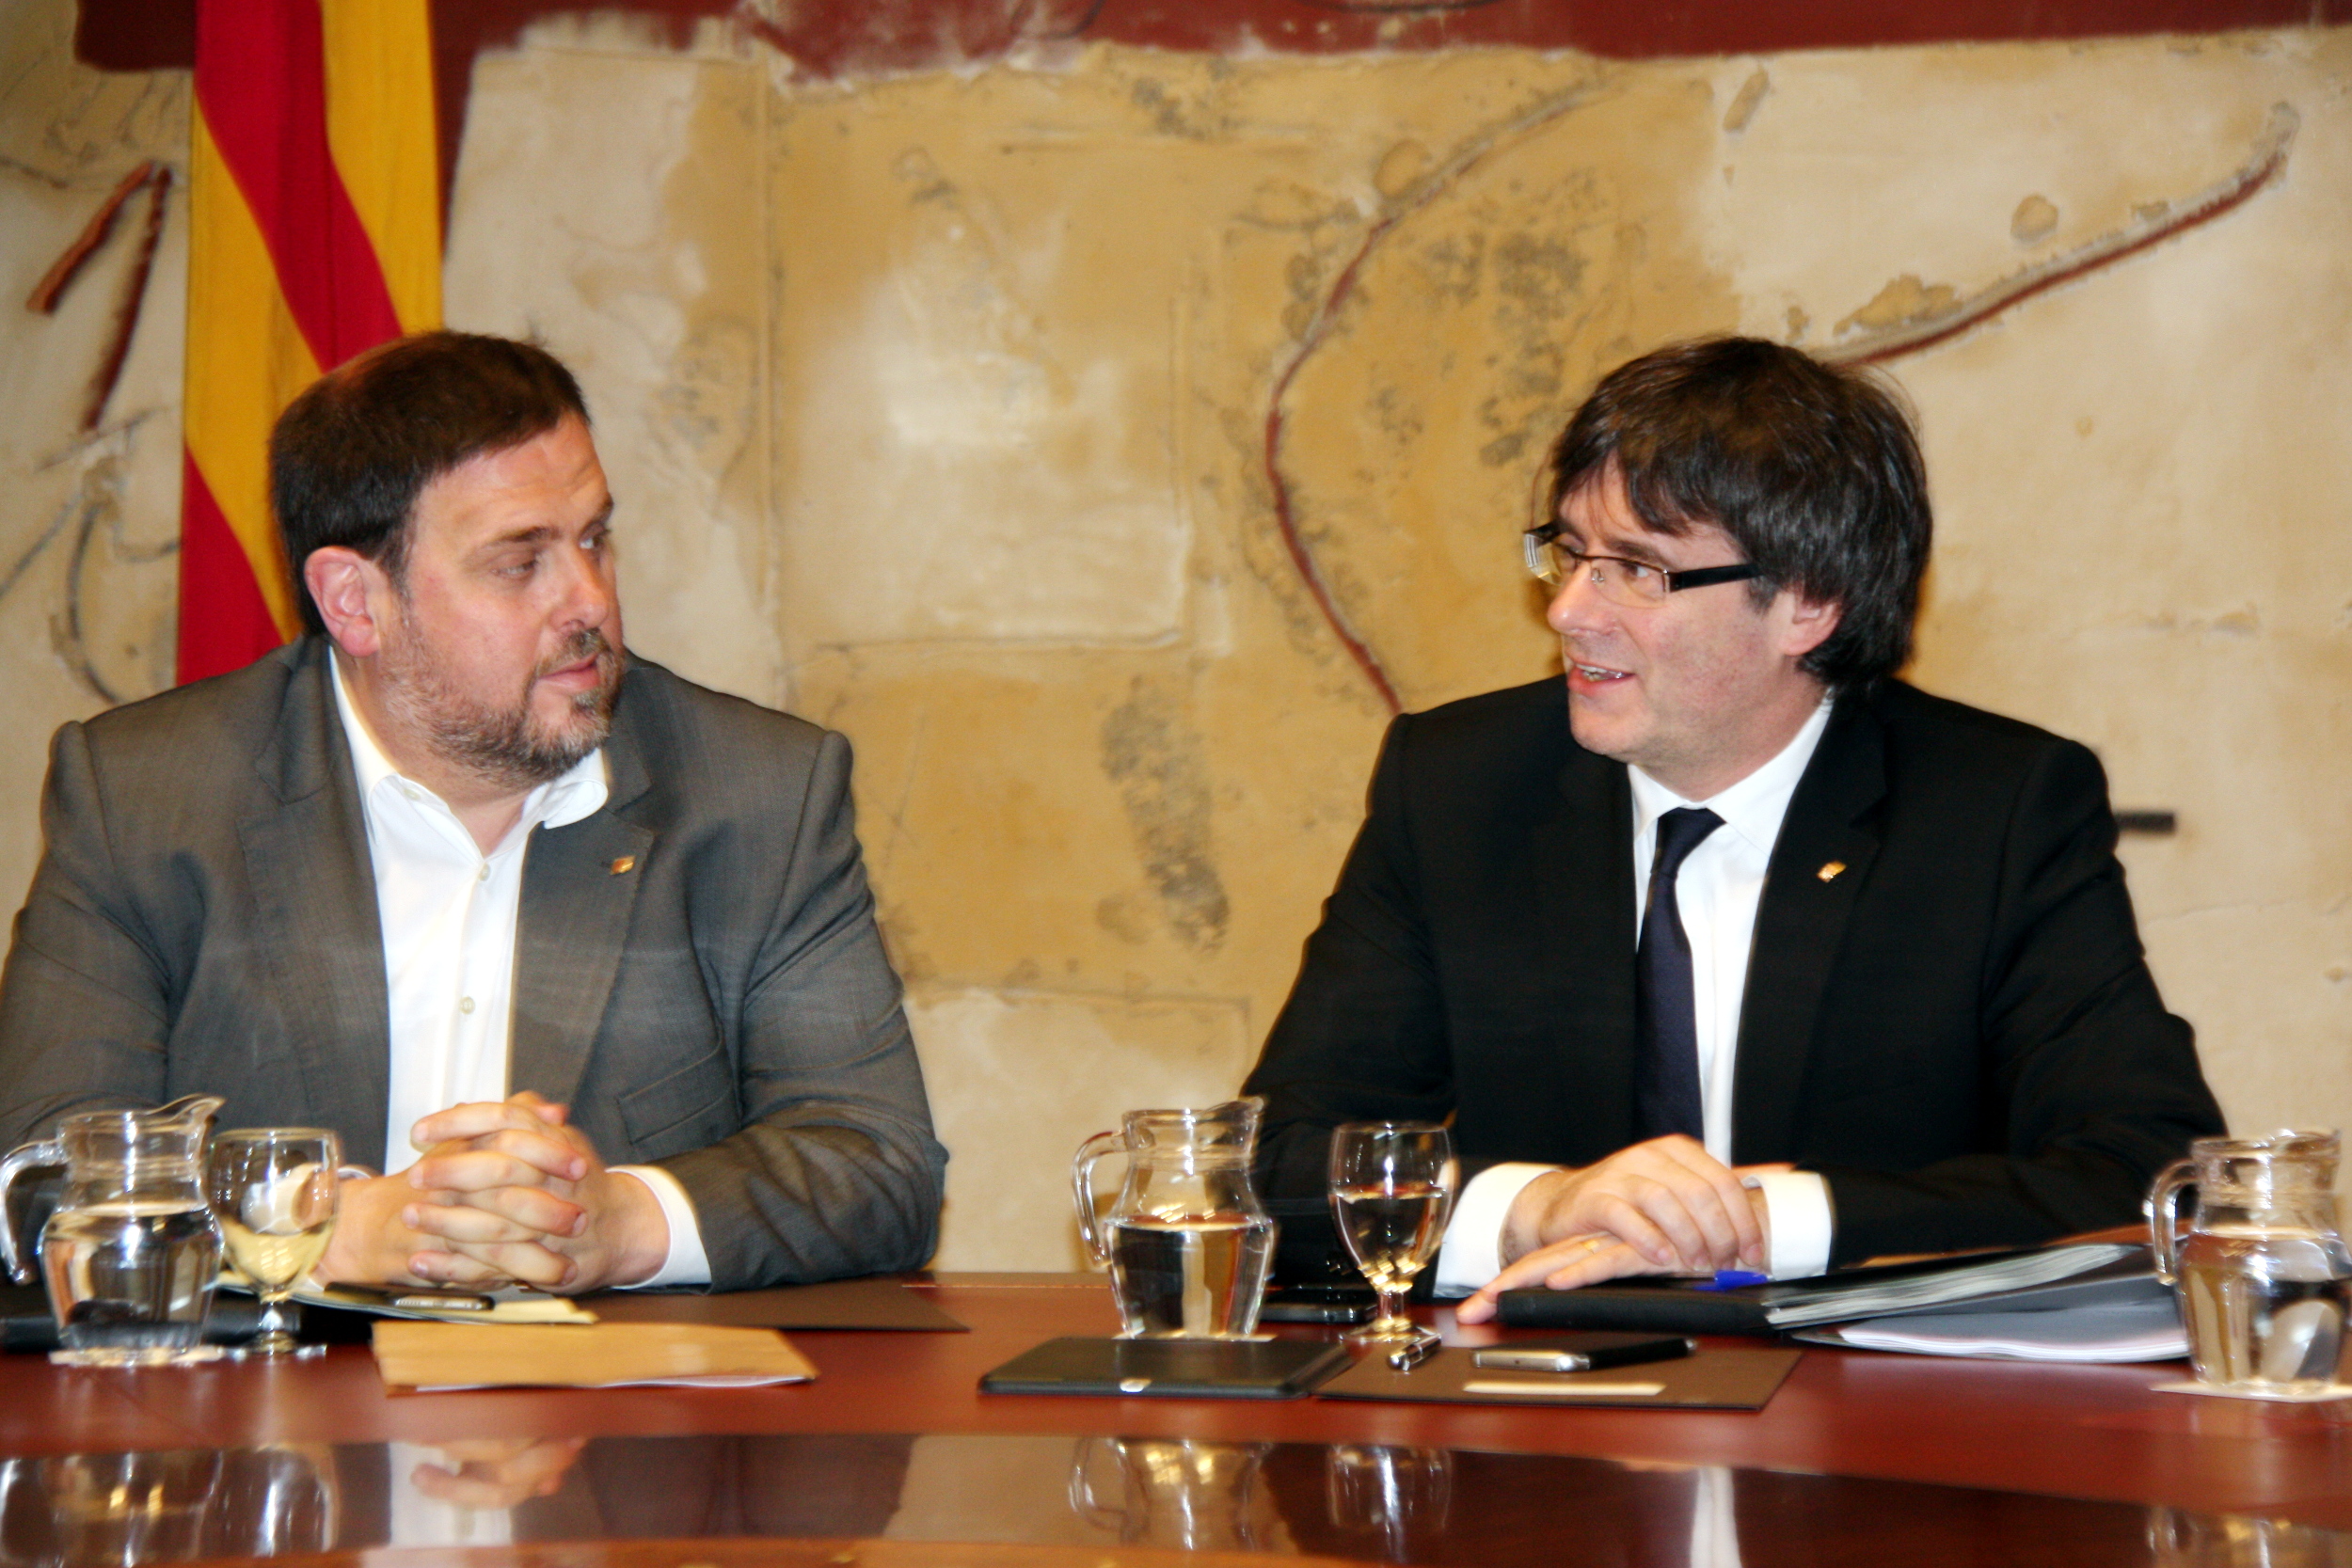 Catalan Vice President and Minister for Economy, Oriol Junqueras and Catalan President, Carles Puigdemont (by ACN)